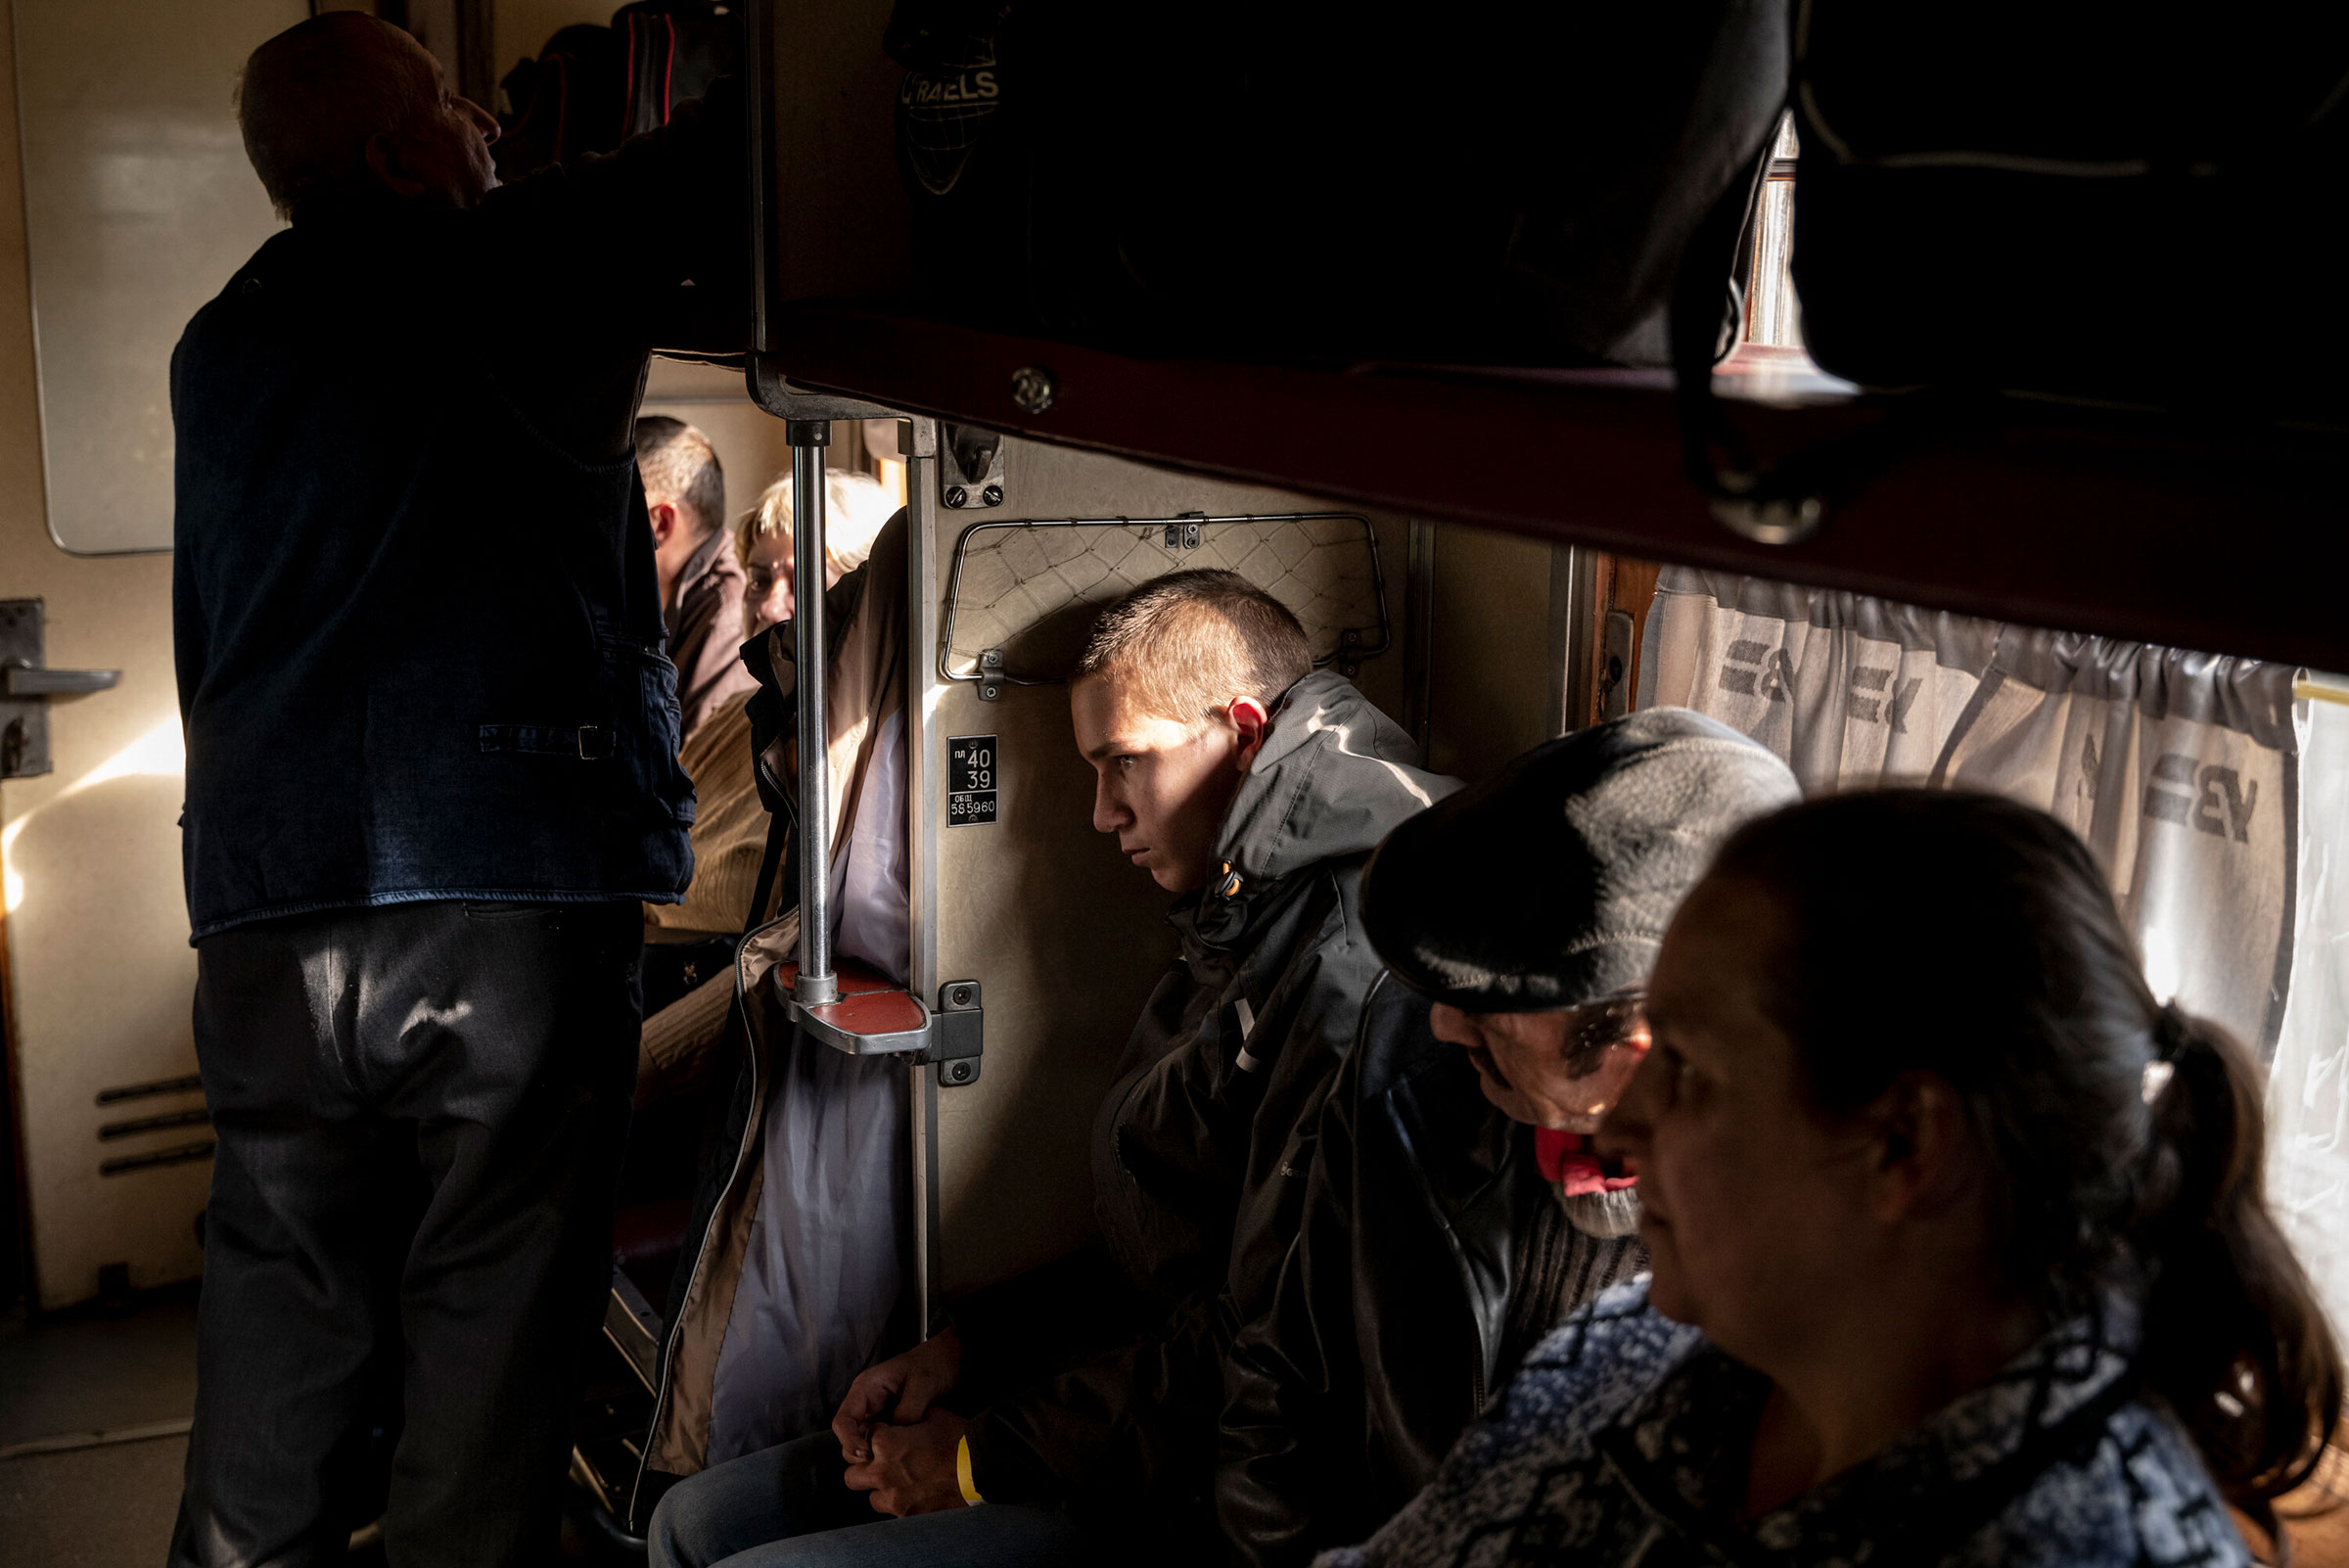 Civilians sit aboard an evacuation train in Pokrovsk, Ukraine, on Sept. 28. (Nicole Tung—The New York Times/Redux)